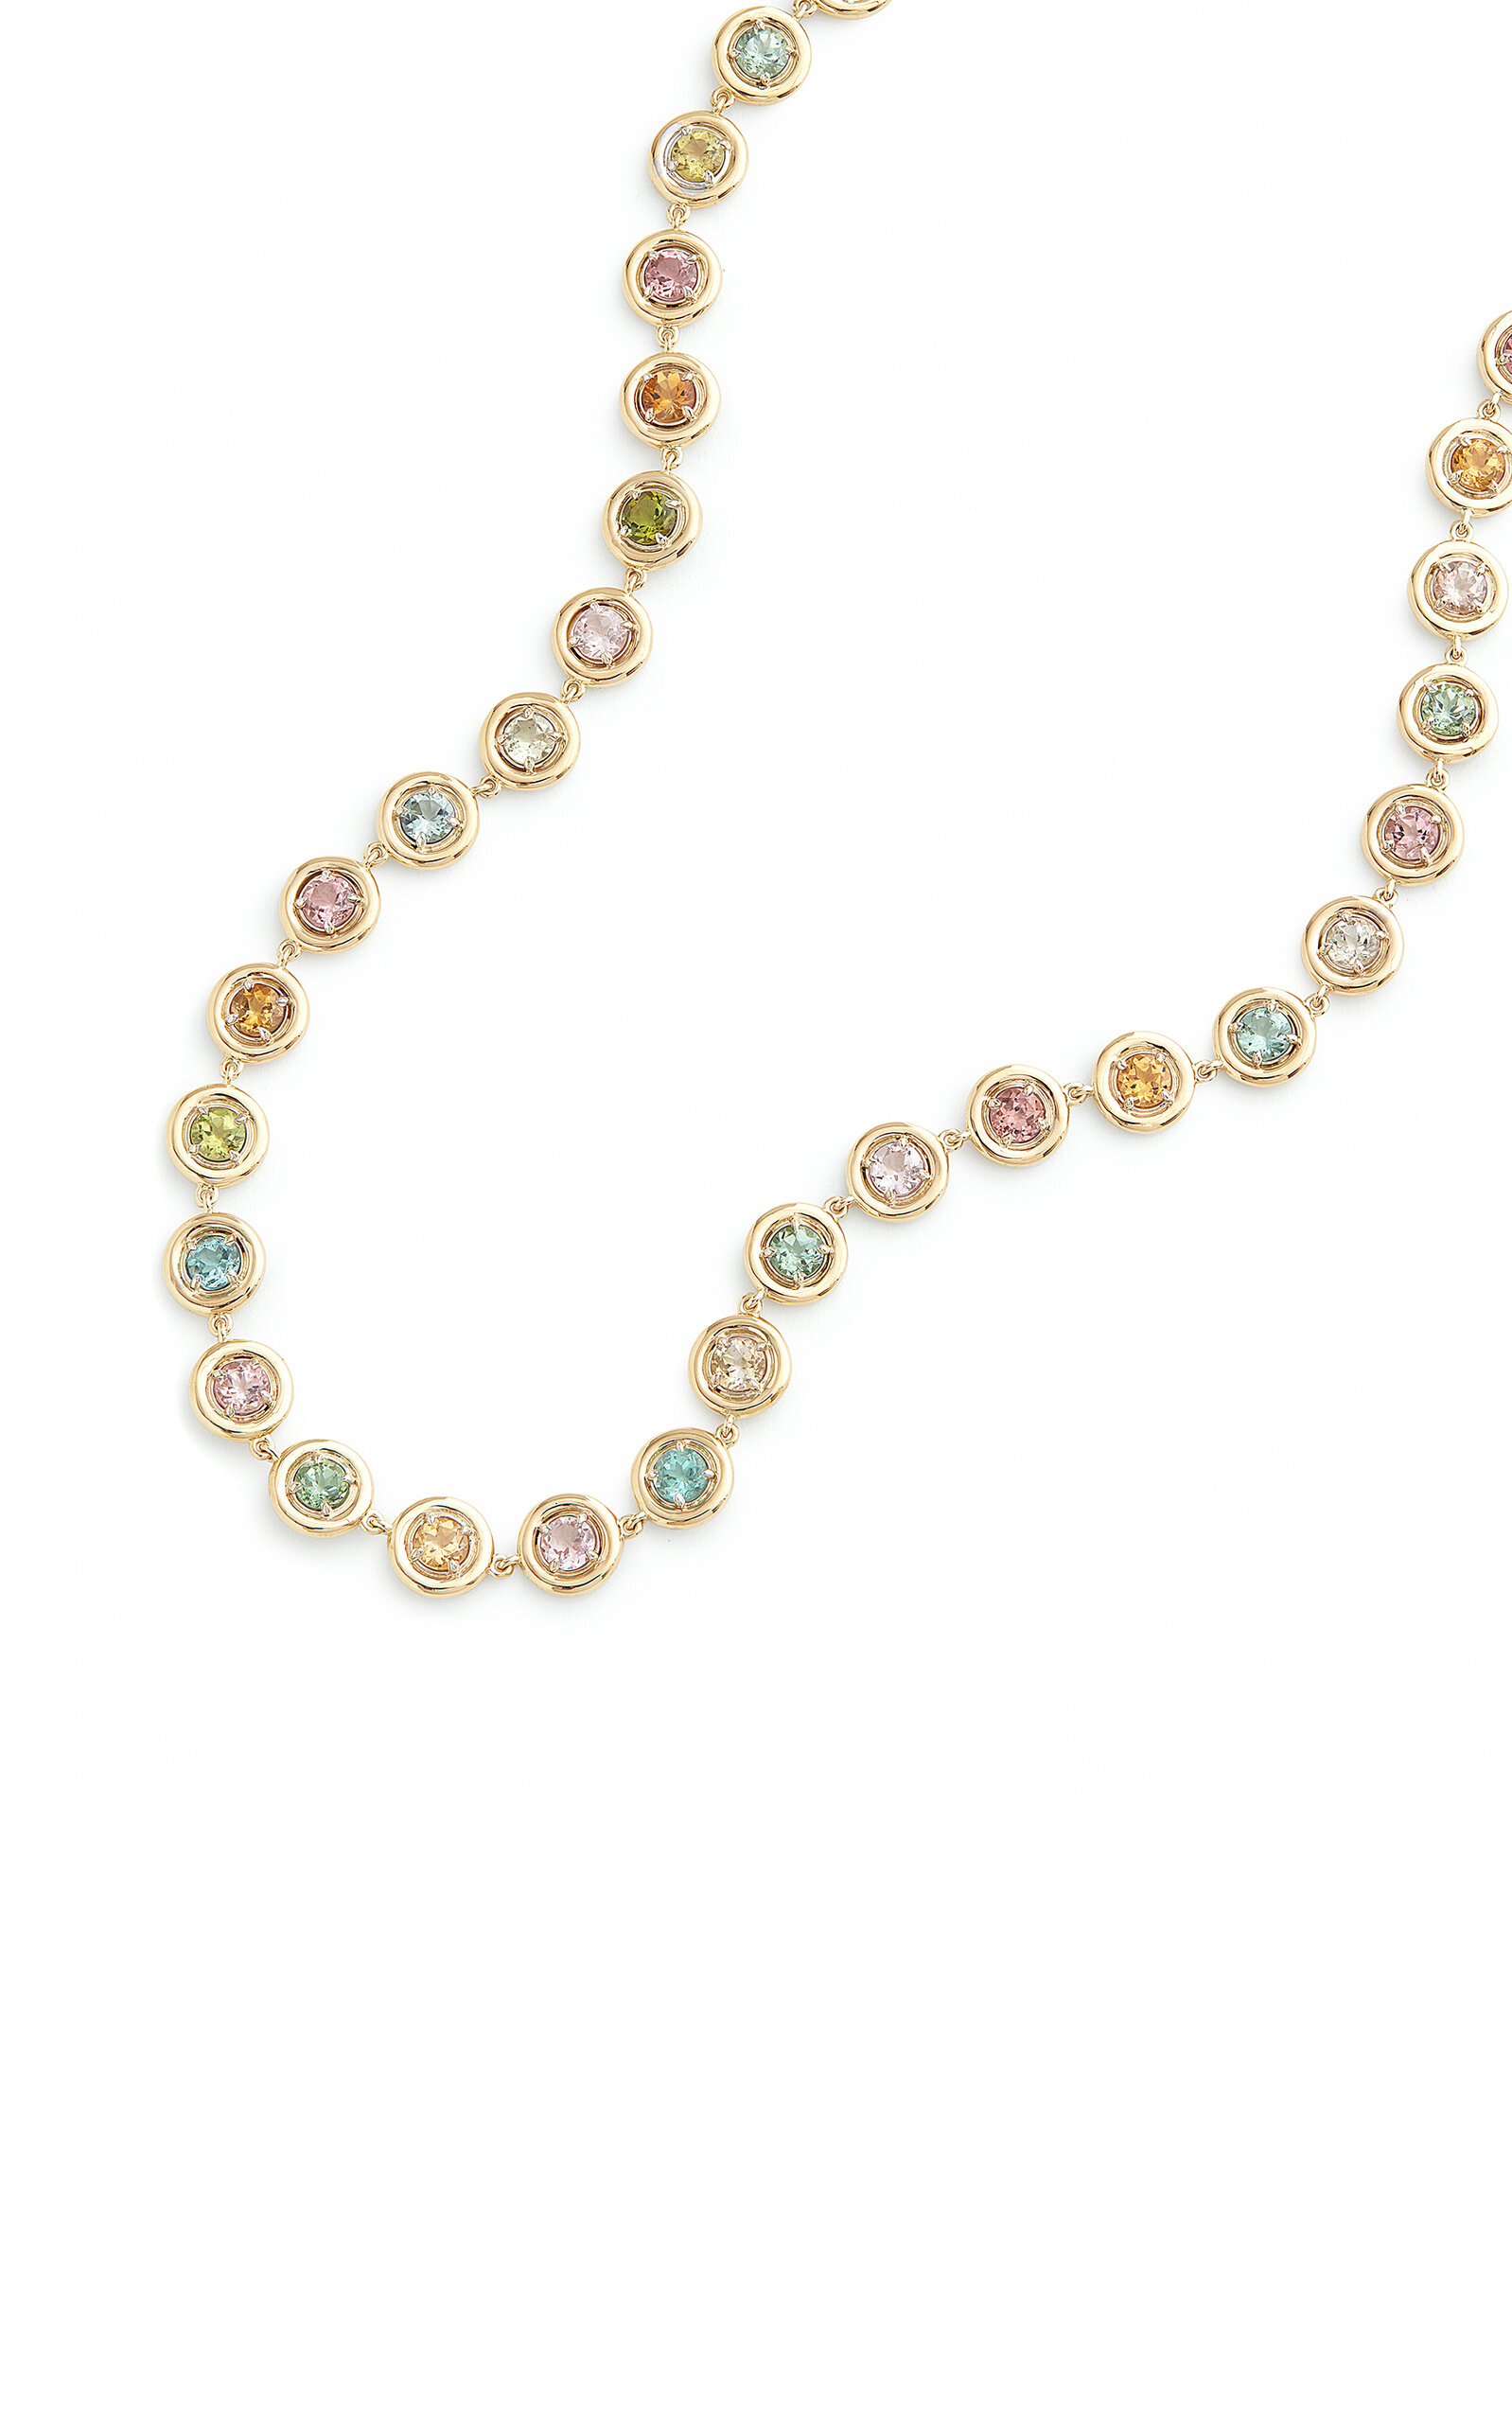 18k Yellow and White Gold Tourmaline Necklace